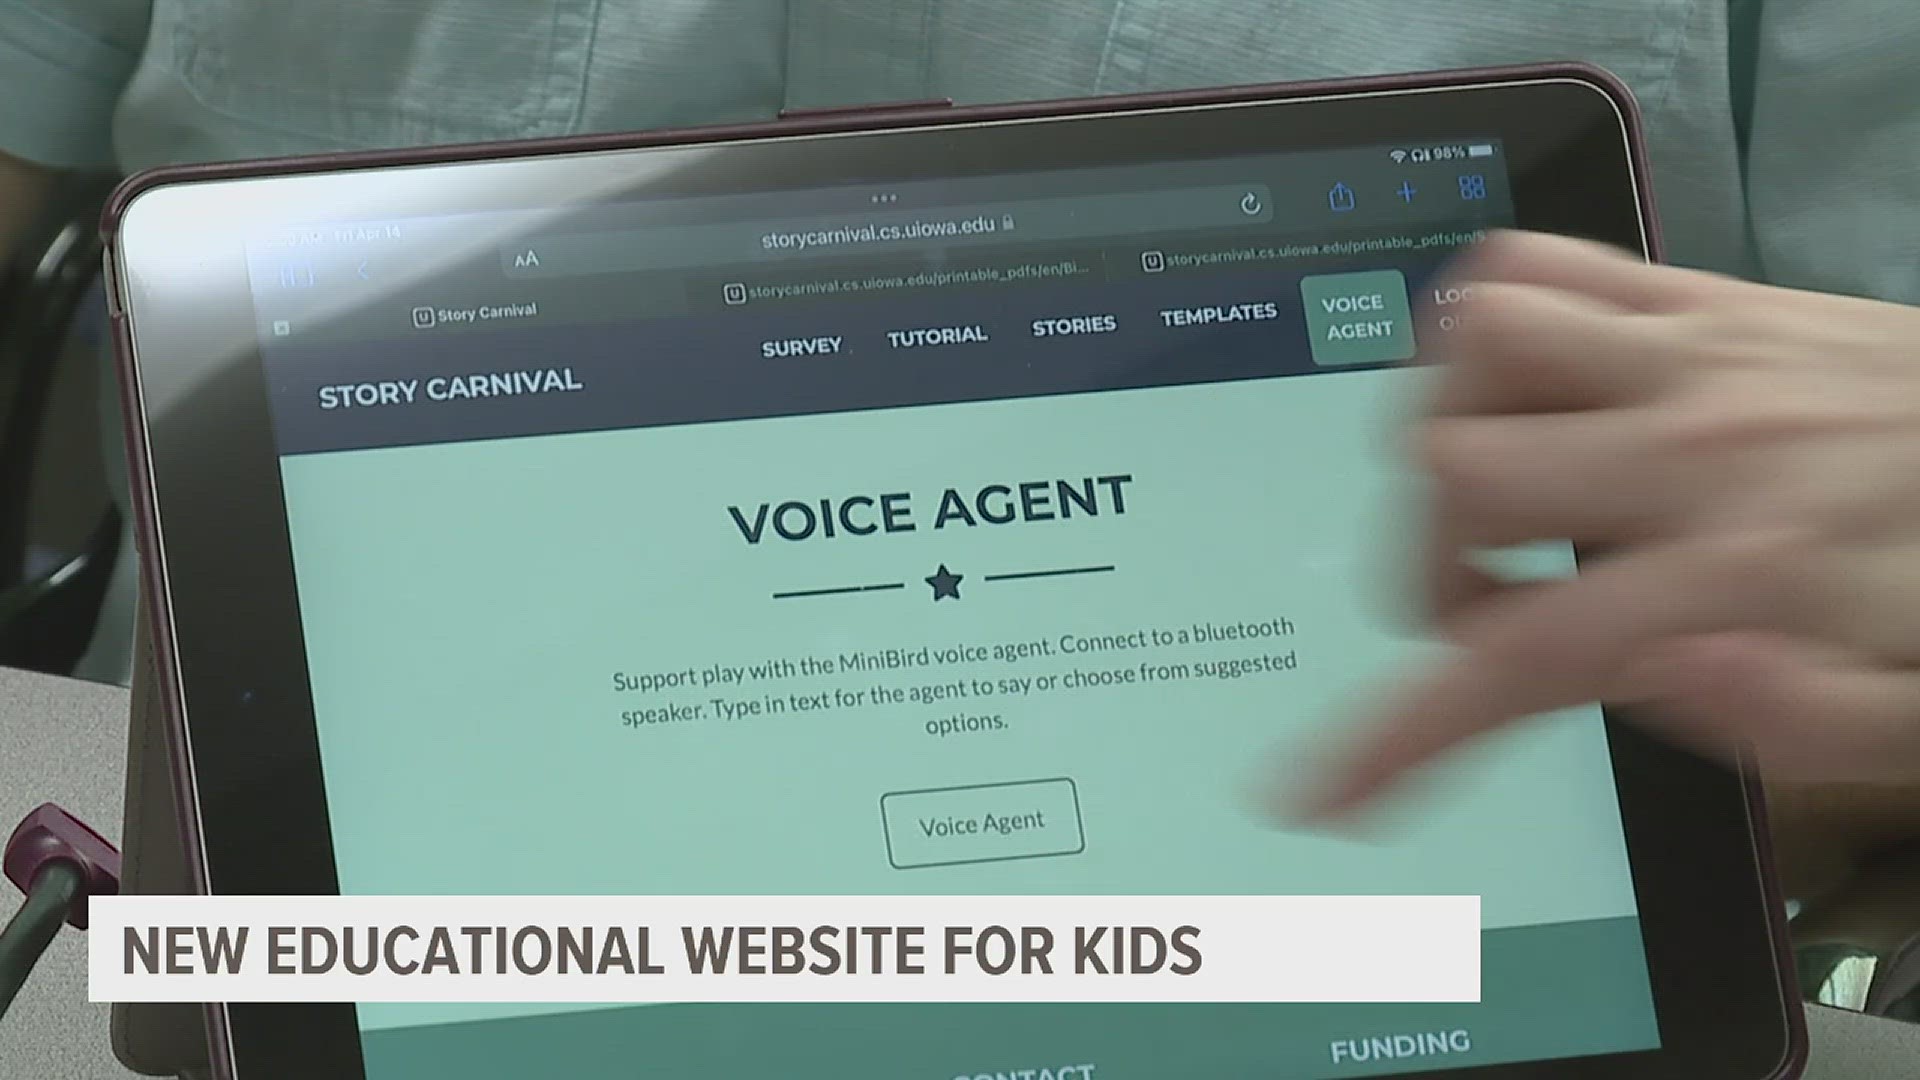 The team from the University of Iowa created a web-based activity platform for kids to collaborate with each other while still looking at a screen.